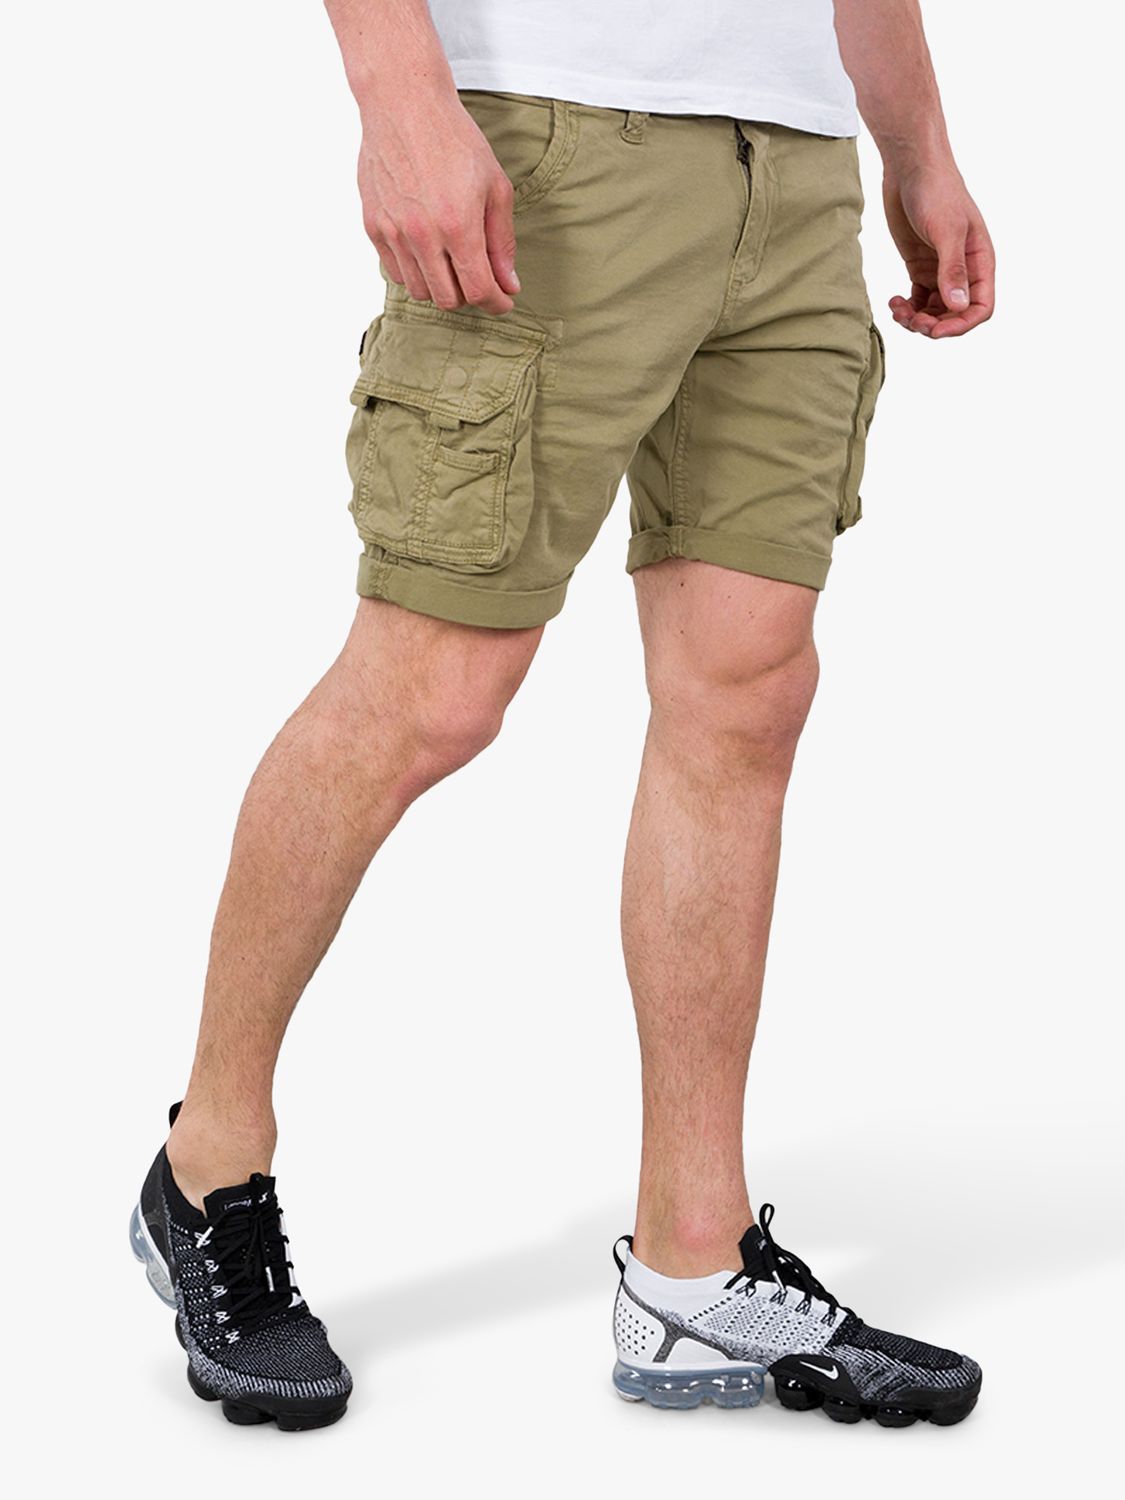 Crew Olive Light Alpha Cargo Shorts, 82 Partners John Lewis at & Industries